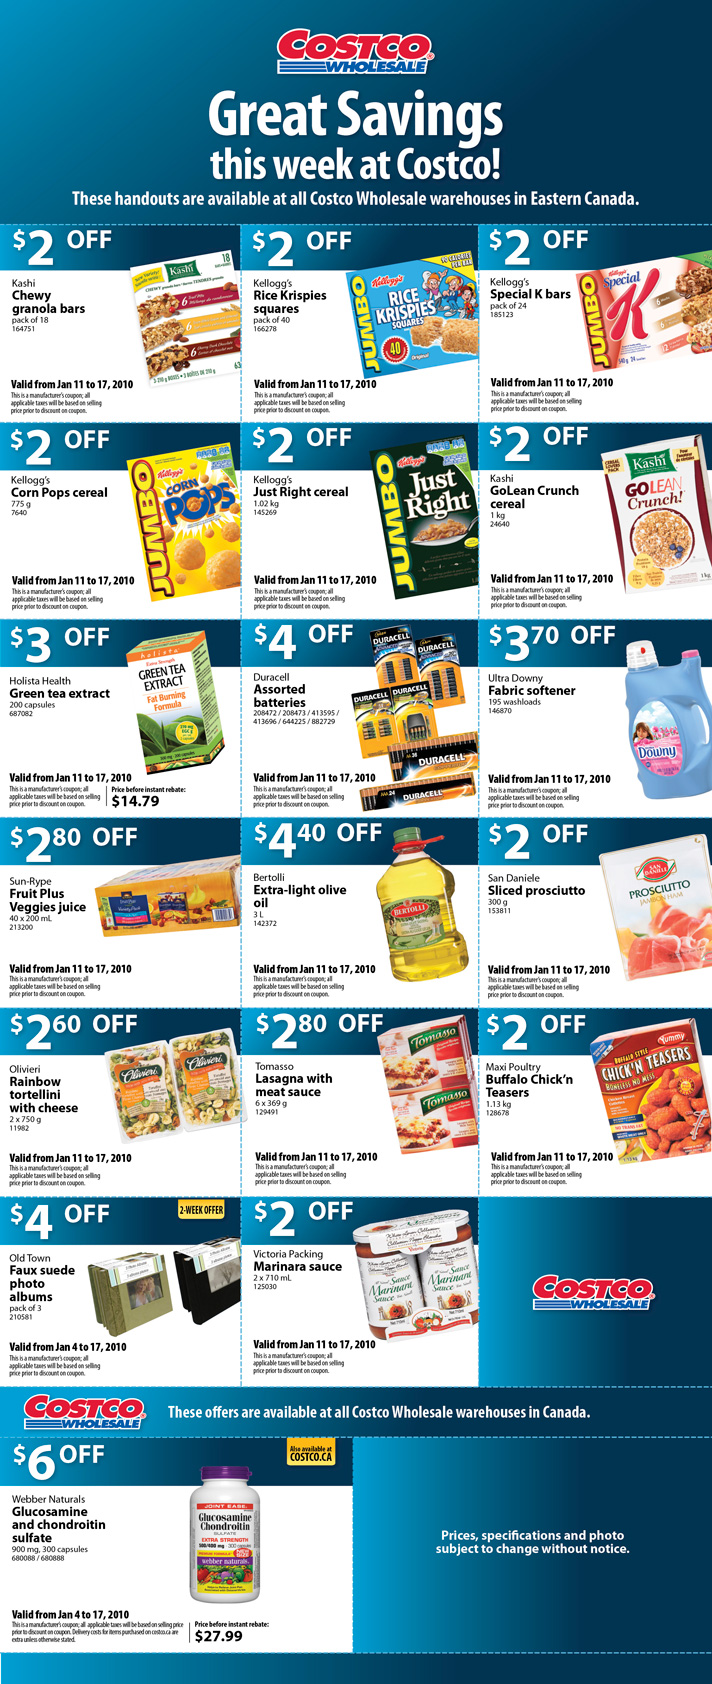 canadian-coupons-costco-instant-savings-coupons-valid-jan-11-17